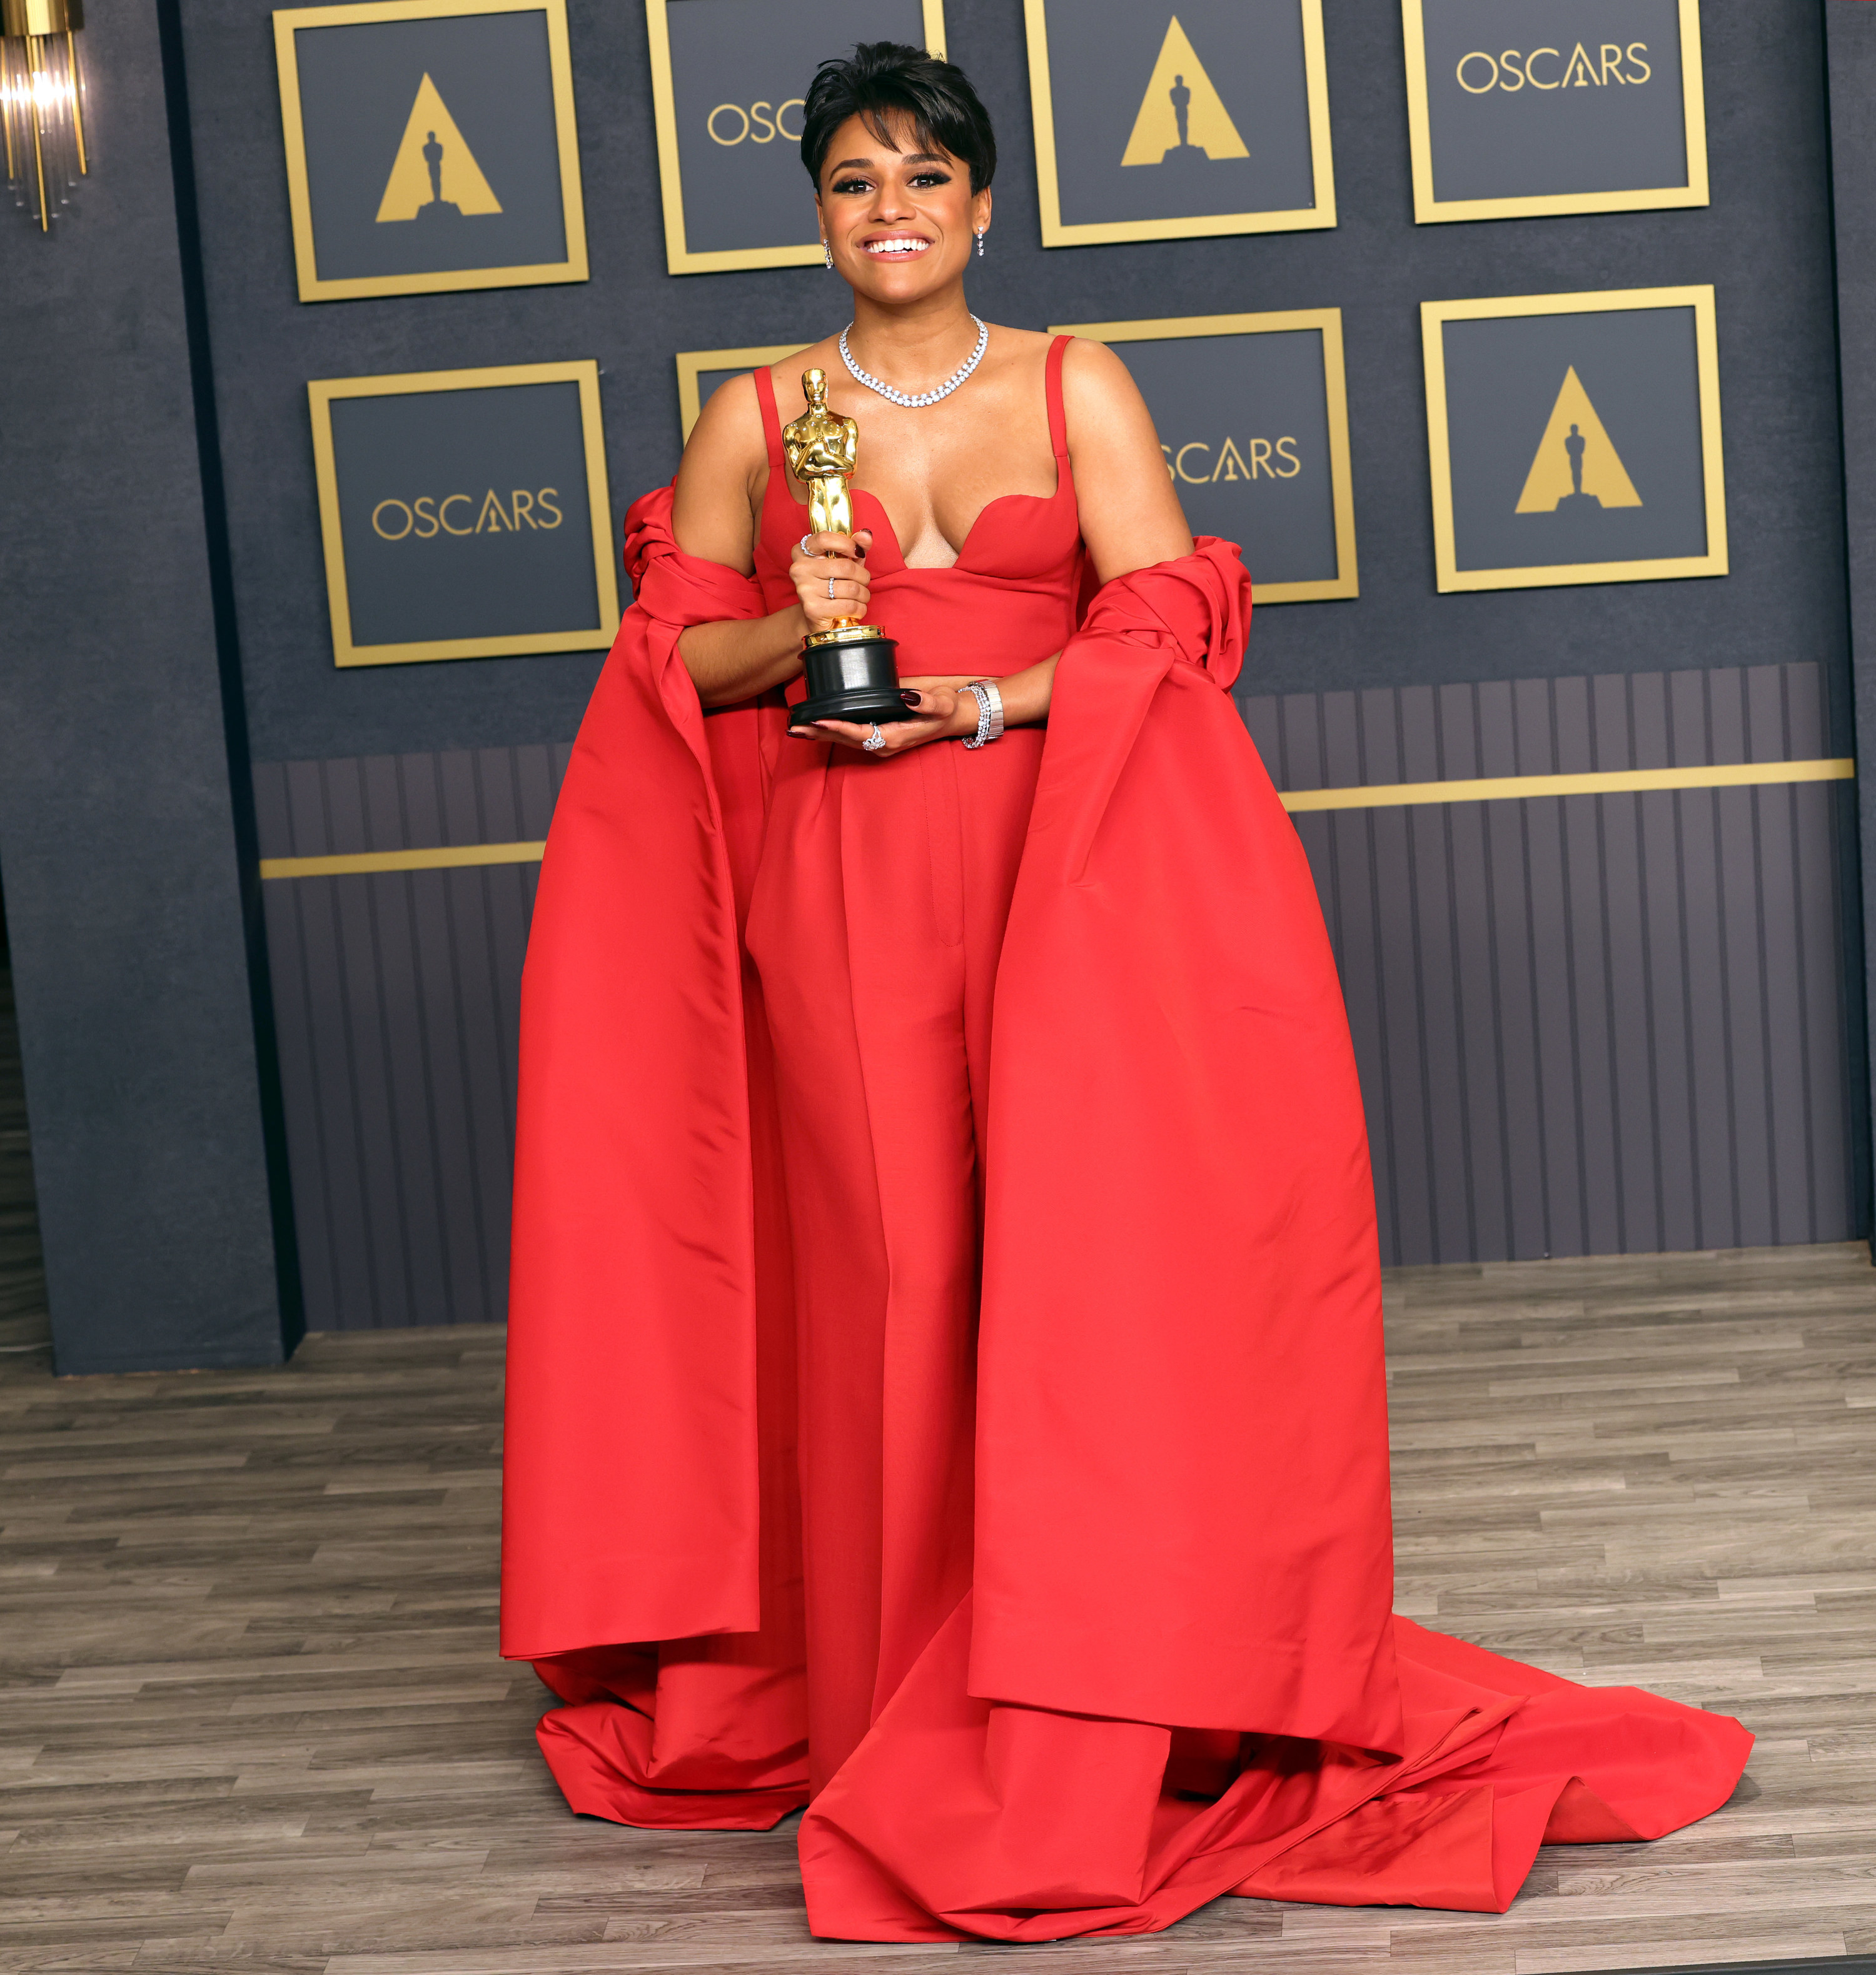 Ariana DeBose holds her Best Supporting Actress Academy Award at the Oscars on March 27, 2022